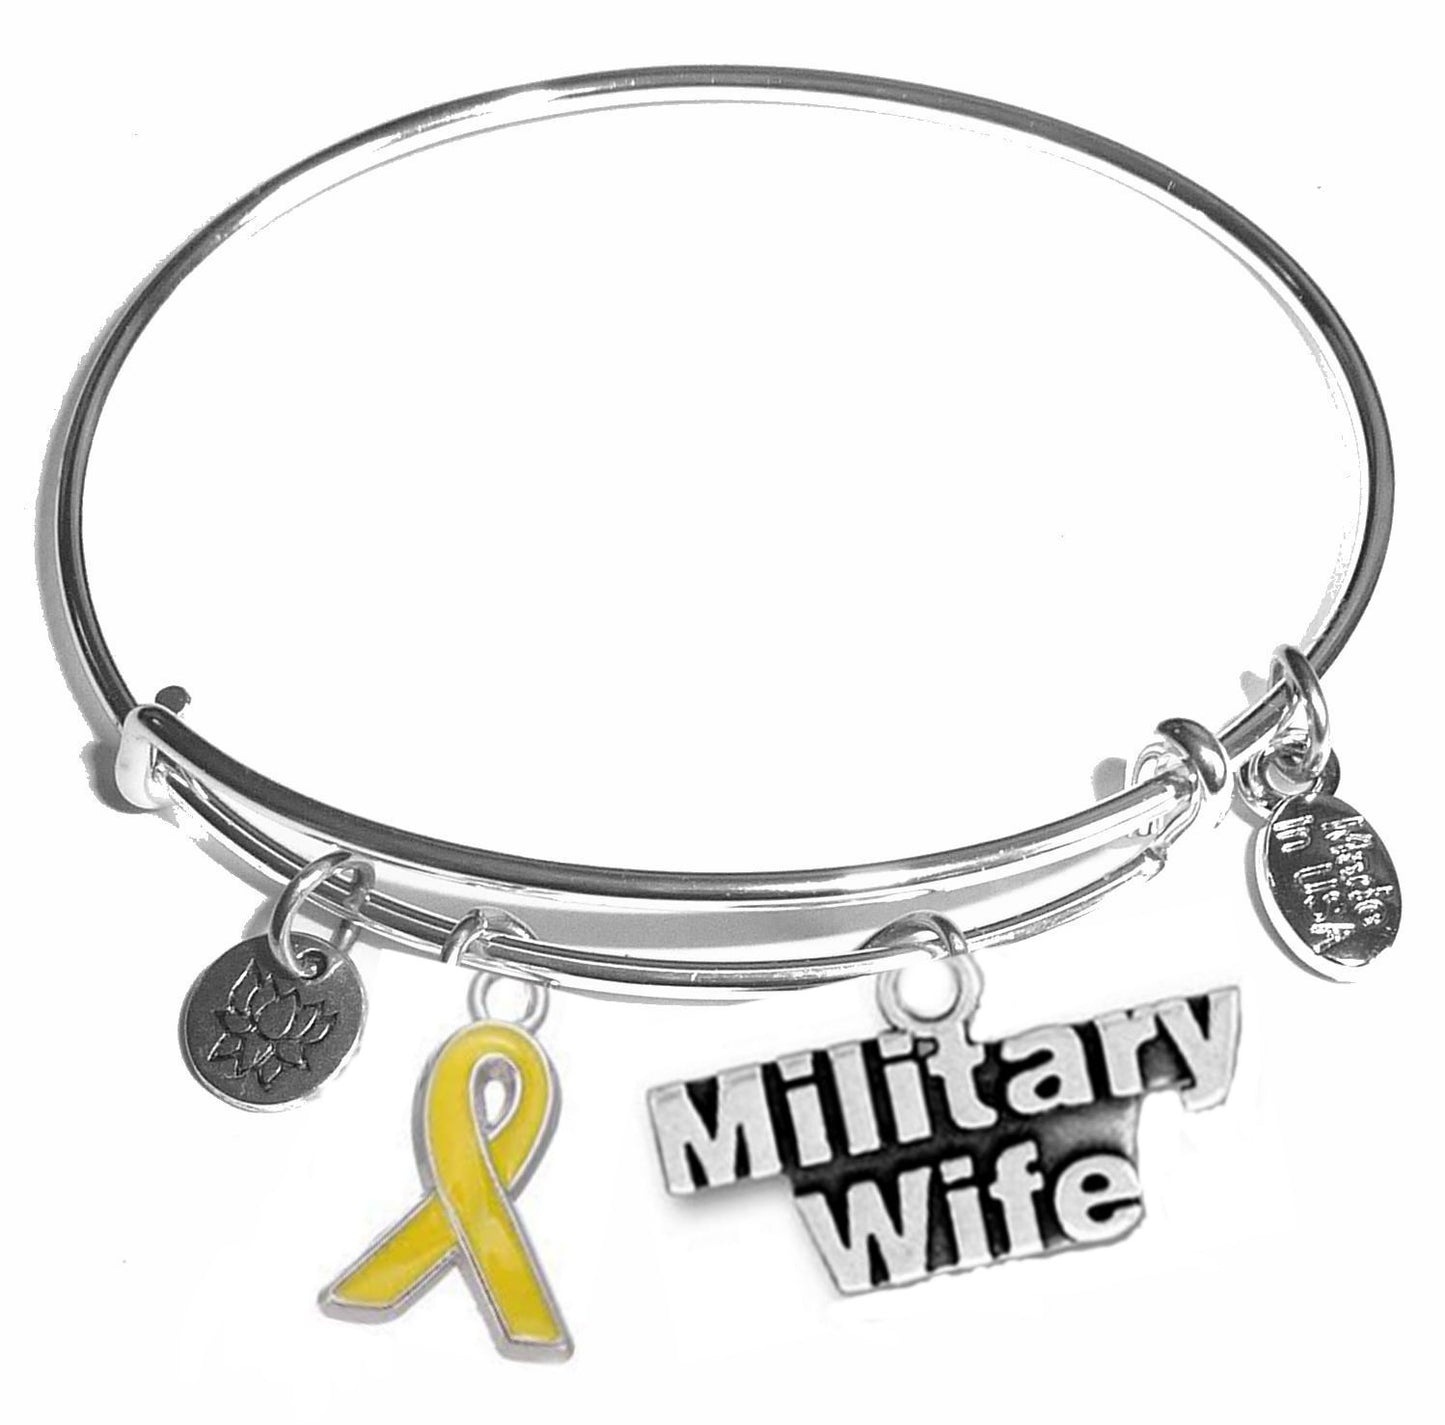 Military Wife- Message Bangle Bracelet - Expandable Wire Bracelet– Comes in a gift box